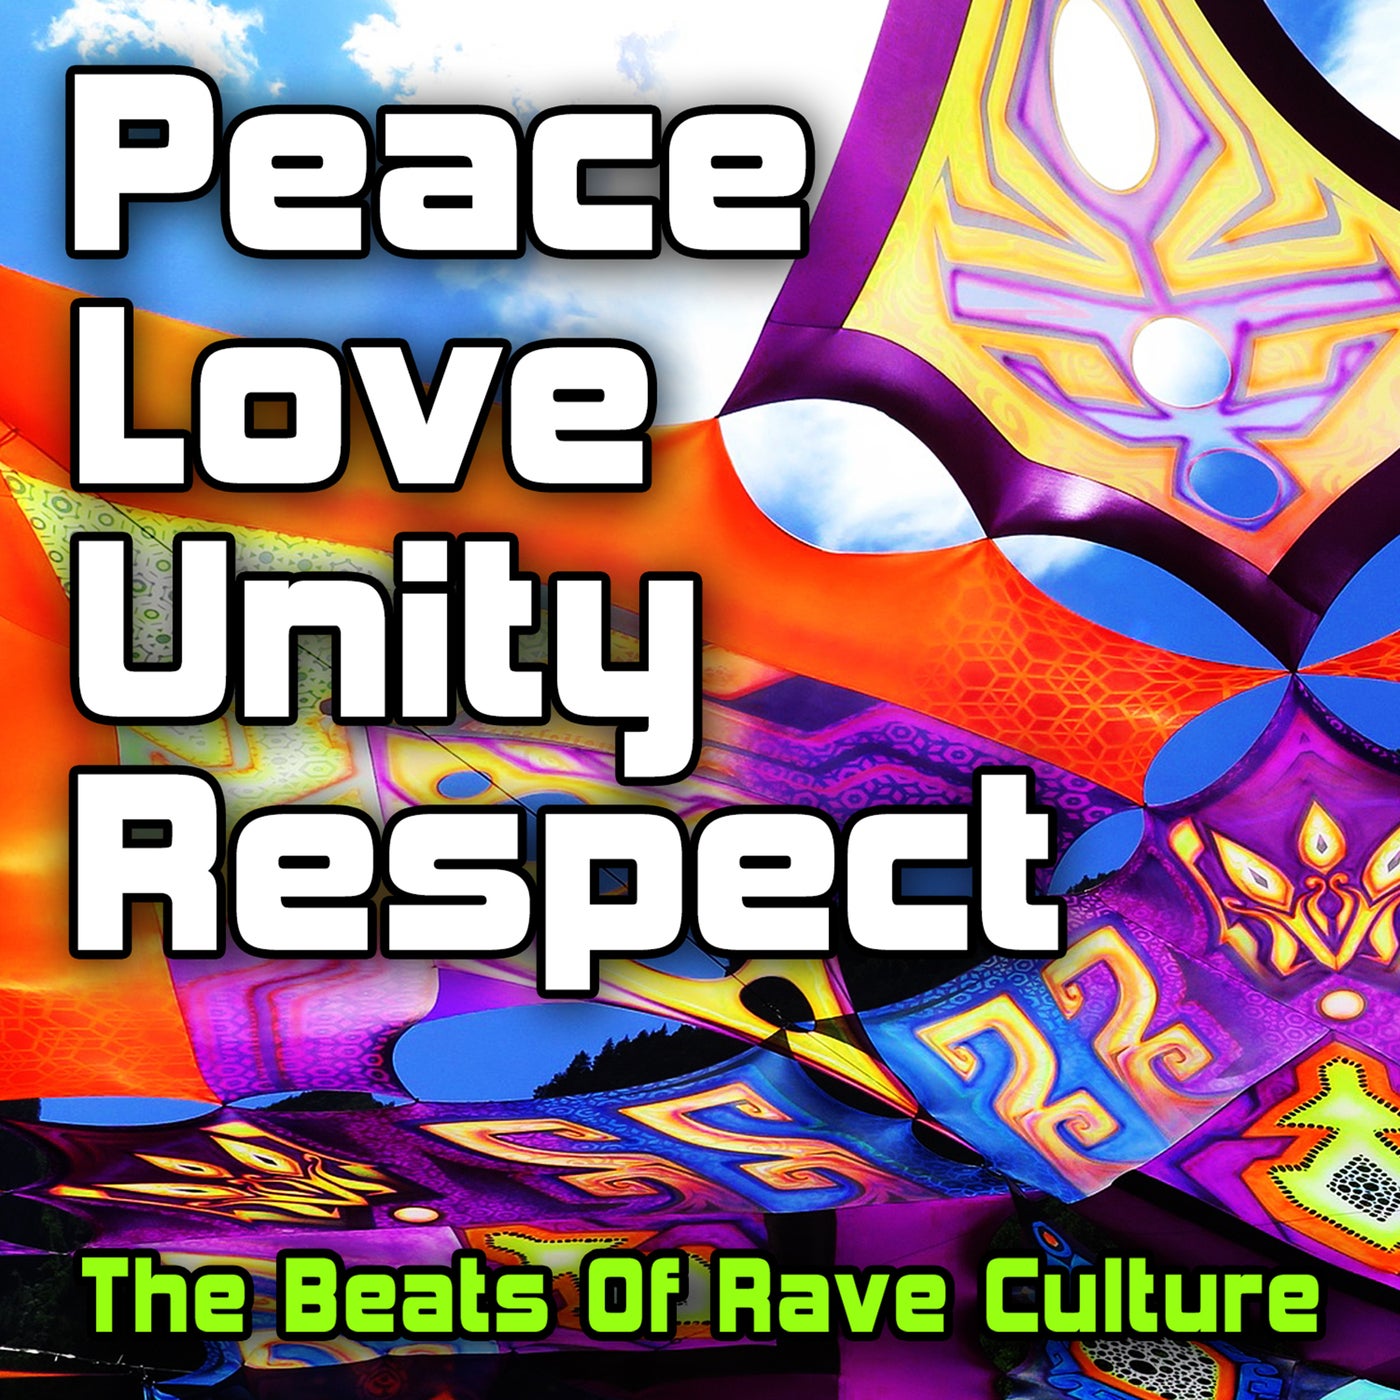 Peace Love Unity Respect (The Beats Of Rave Culture)